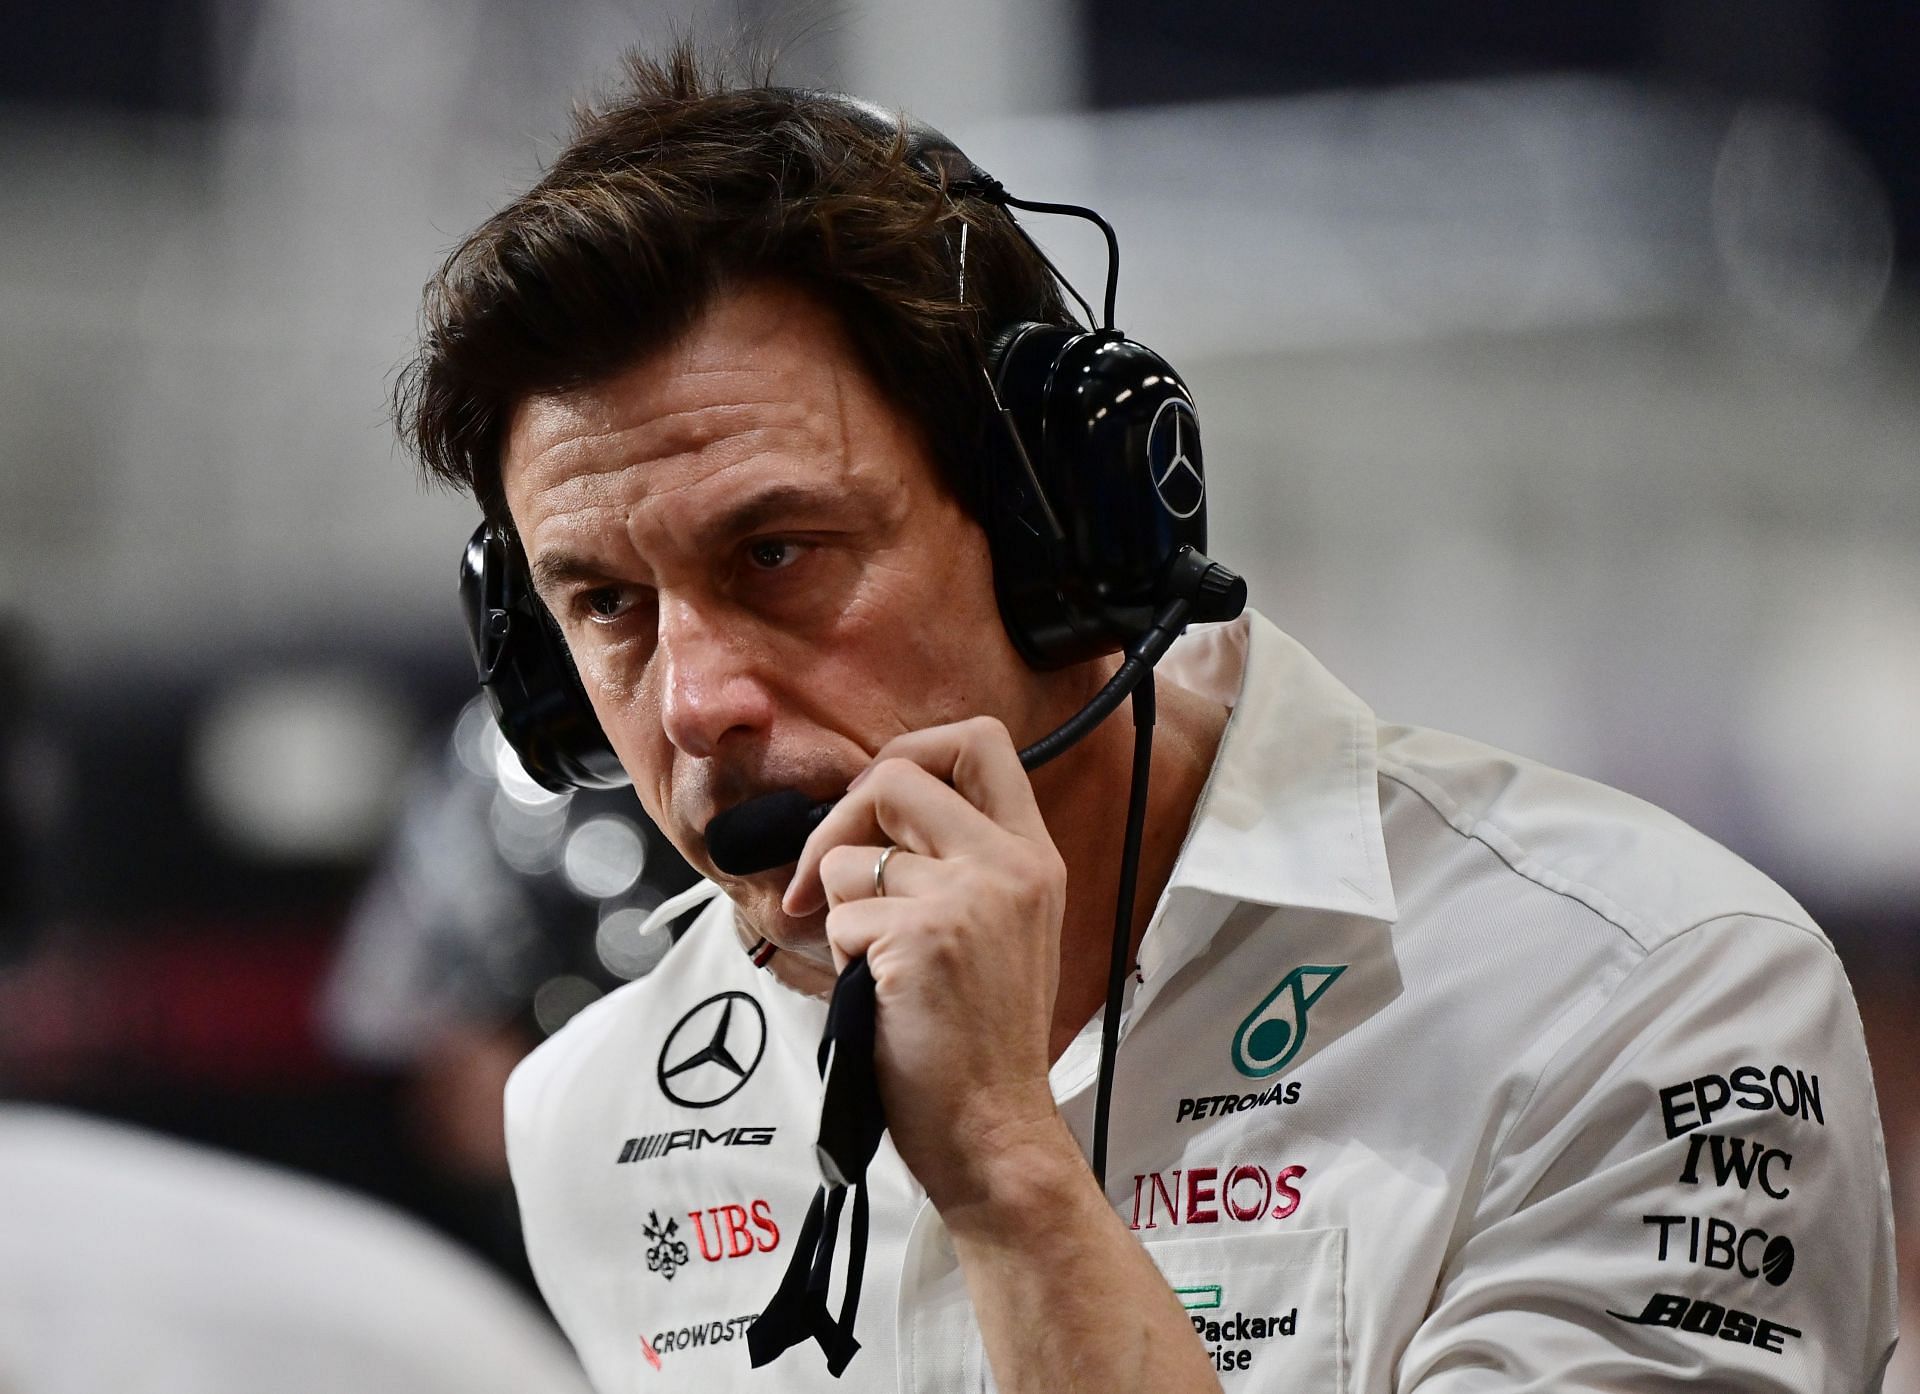 Toto Wolff talks on his team radio during the F1 Grand Prix of Saudi Arabia (Photo by Andrej Isakovic - Pool/Getty Images)